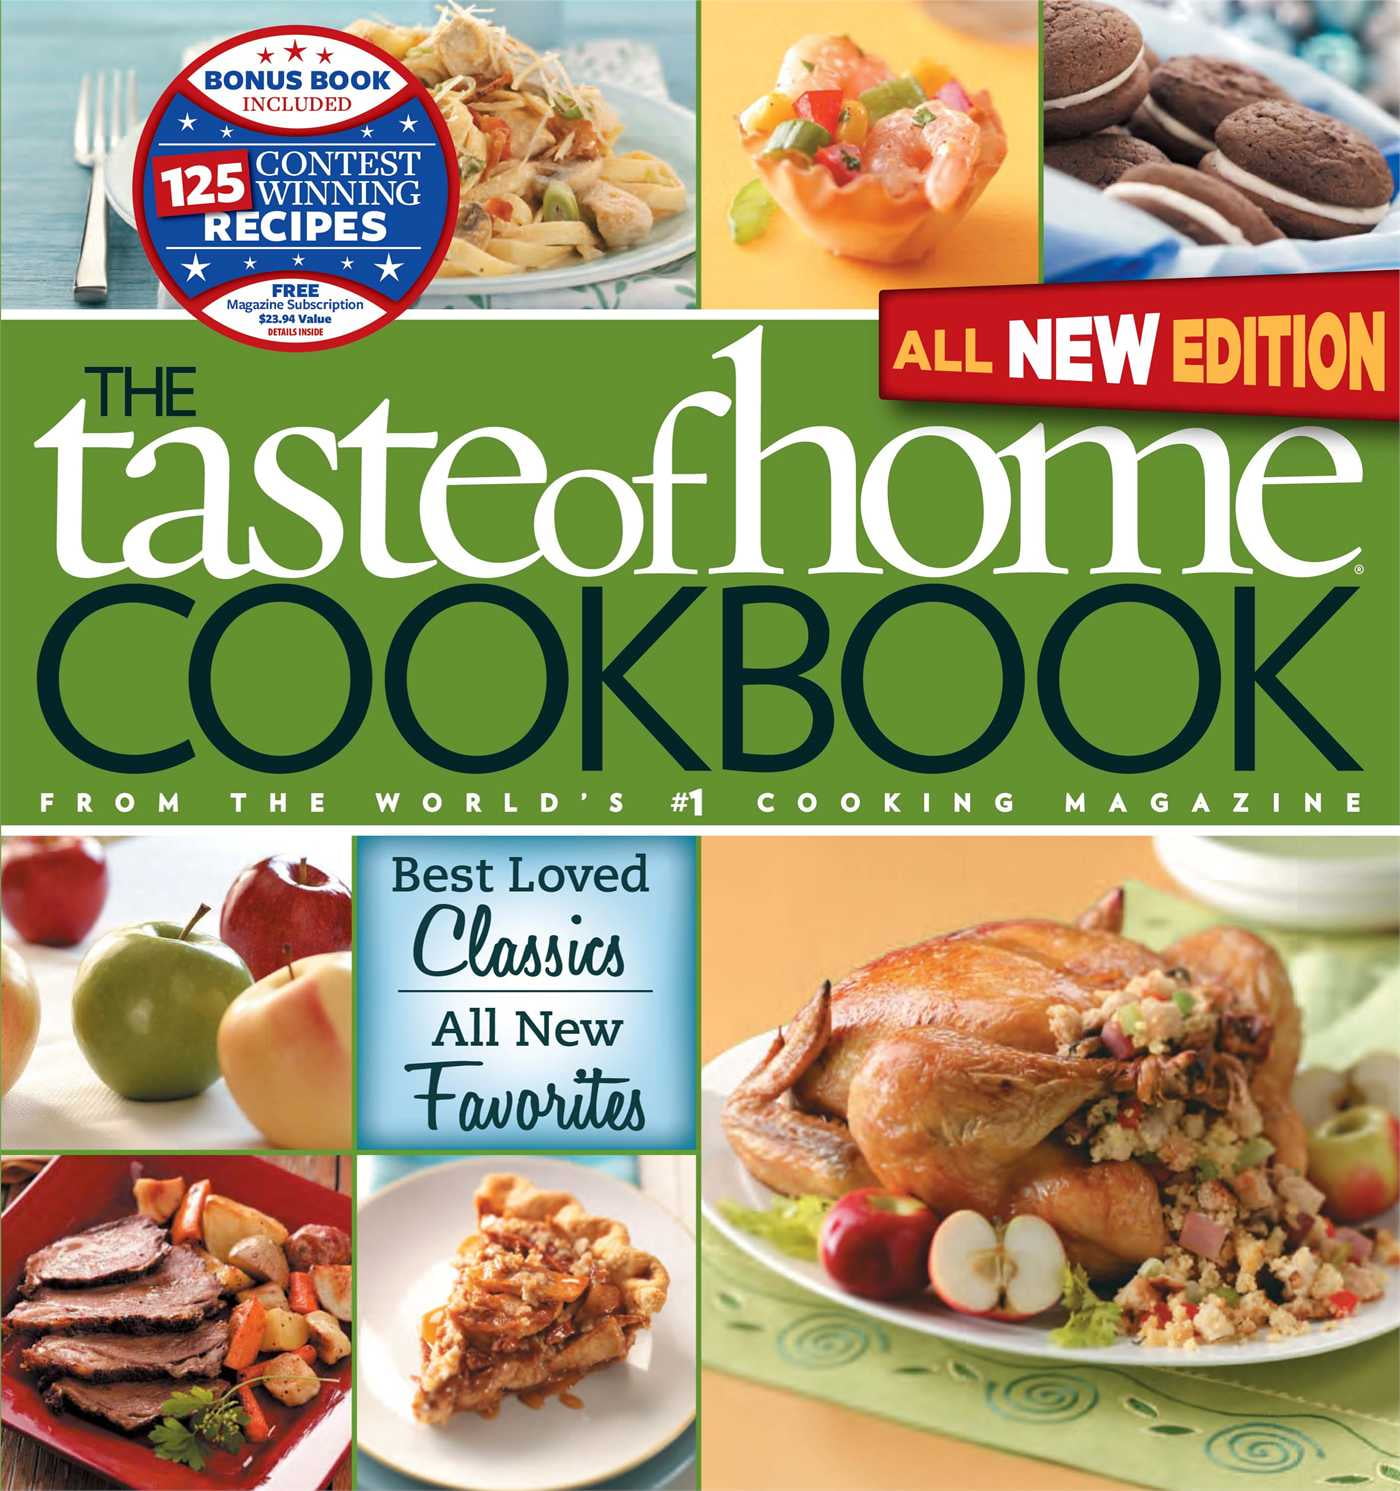 Taste of Home Cookbook, All NEW 3rd Edition with Contest Winners